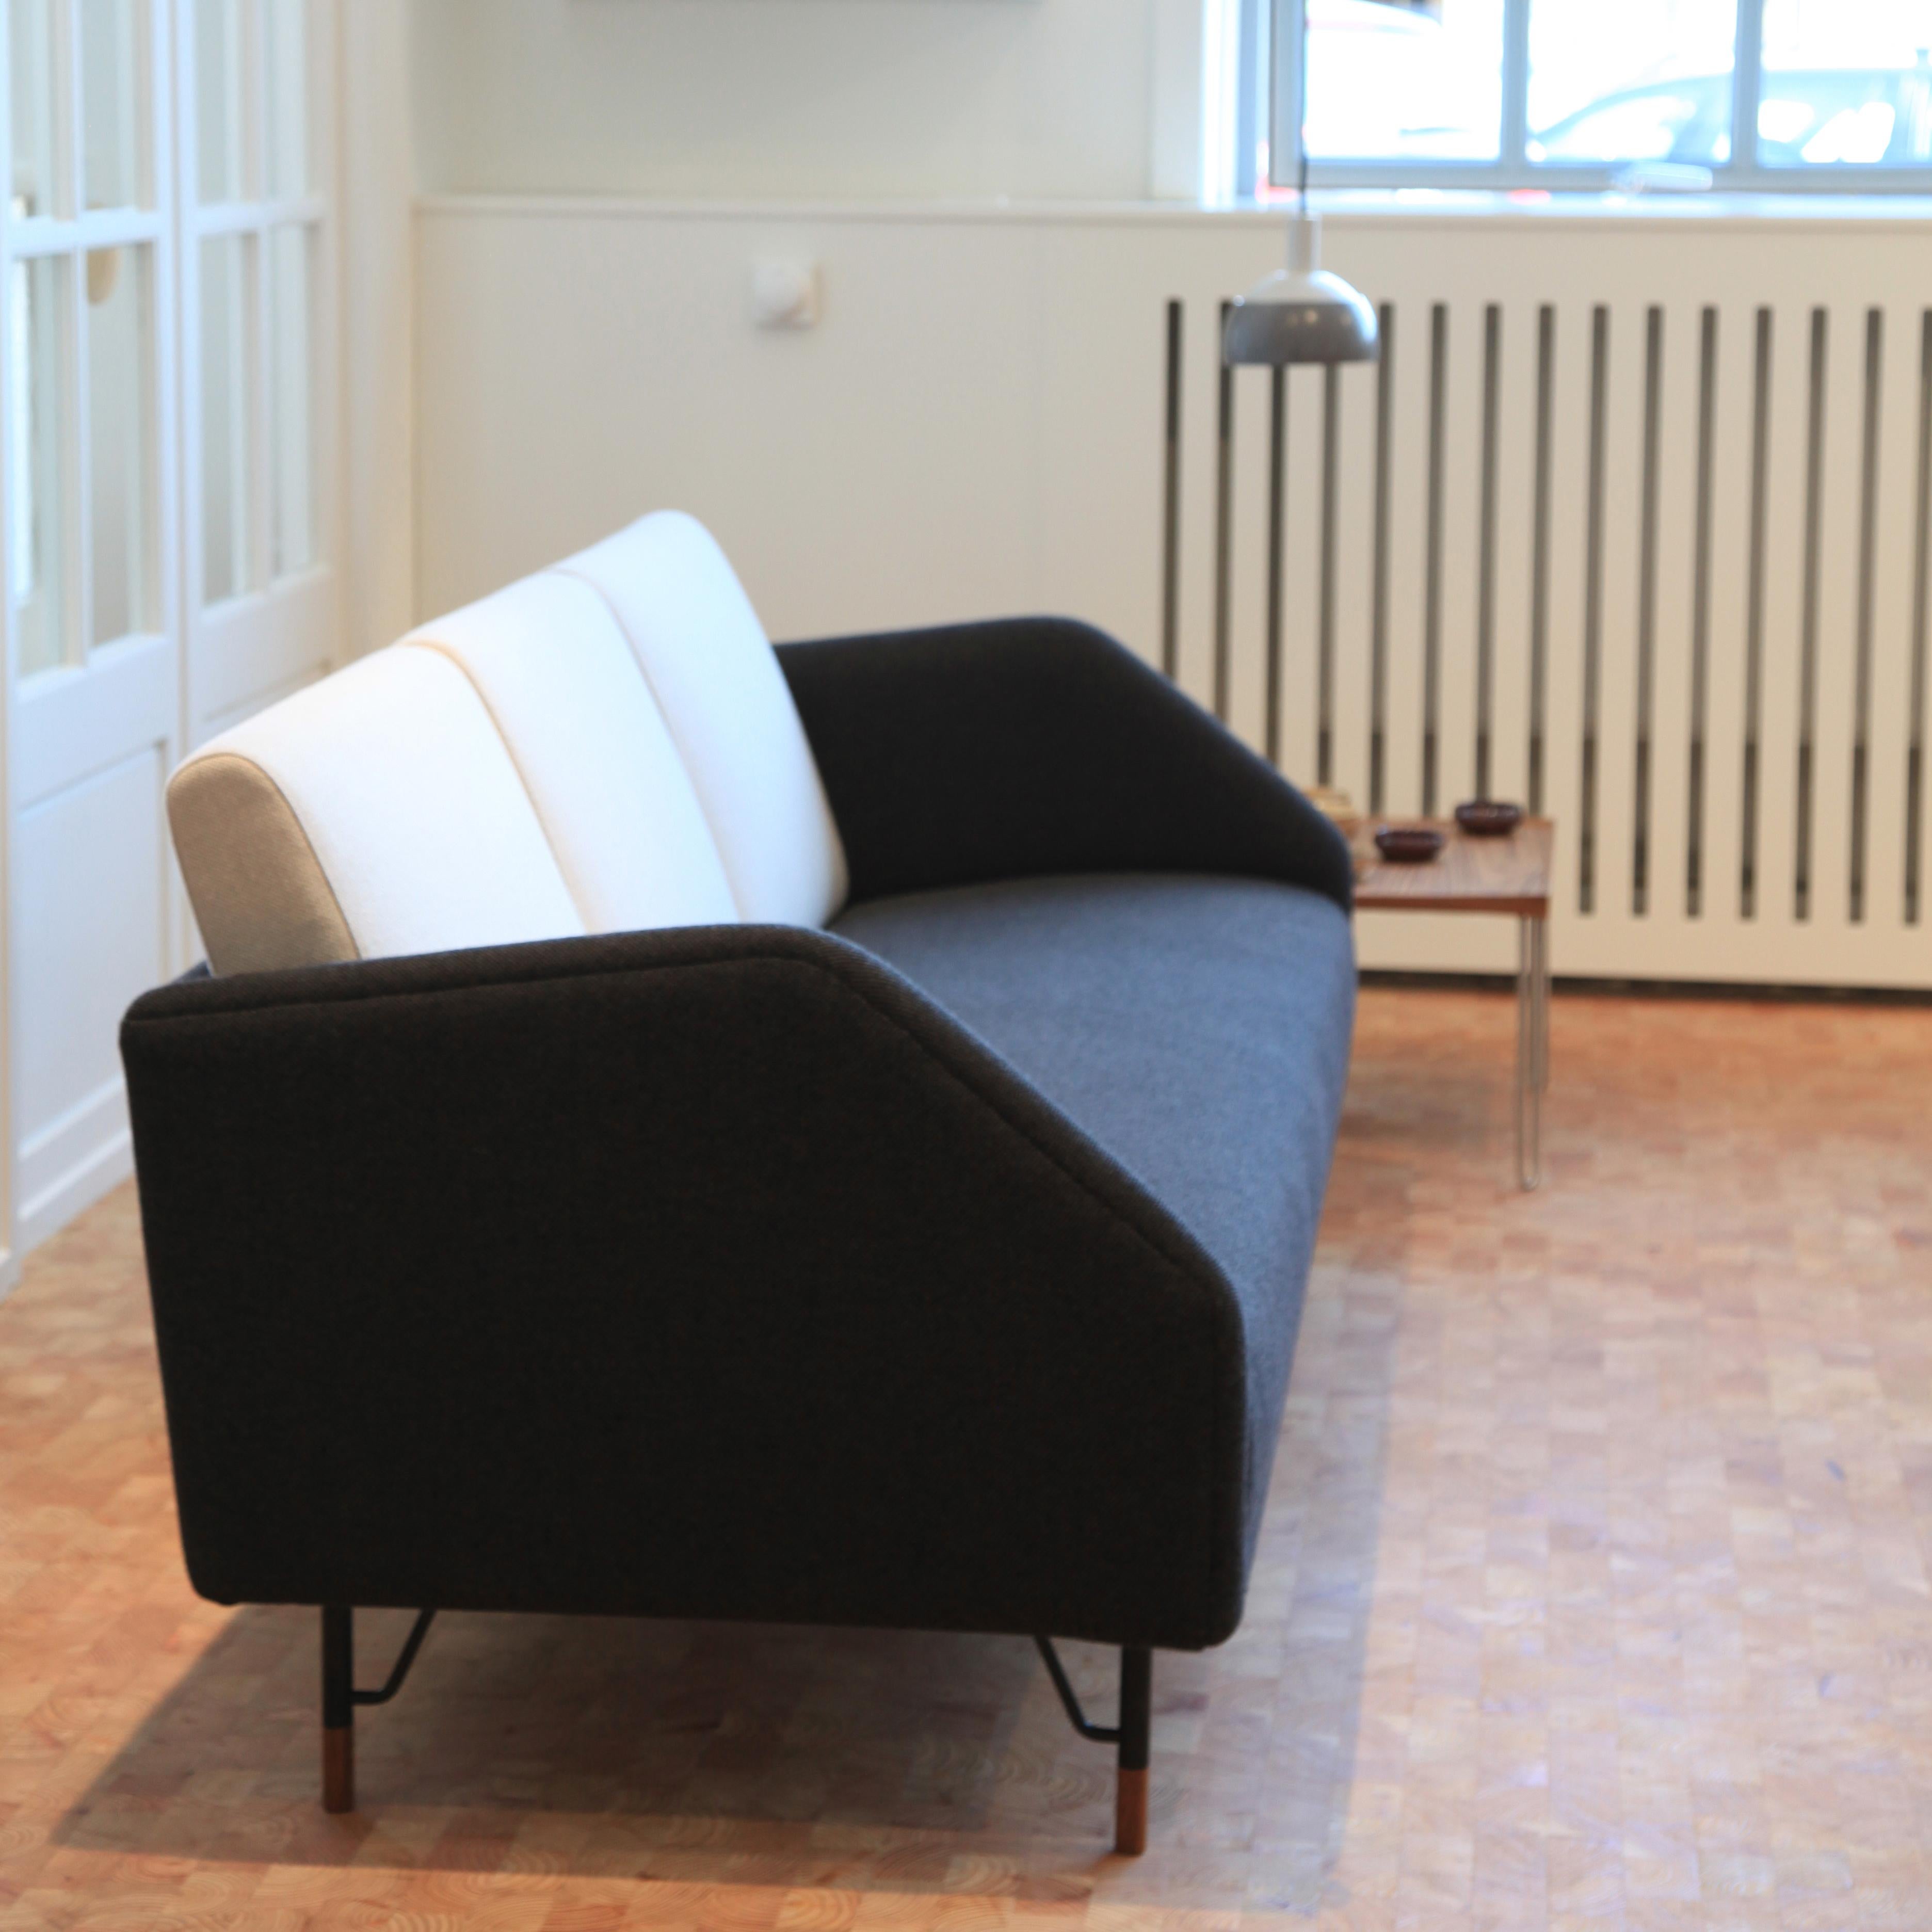 Finn Juhl 3-Seat 77 Sofa Couch, Wood and Fabric 1